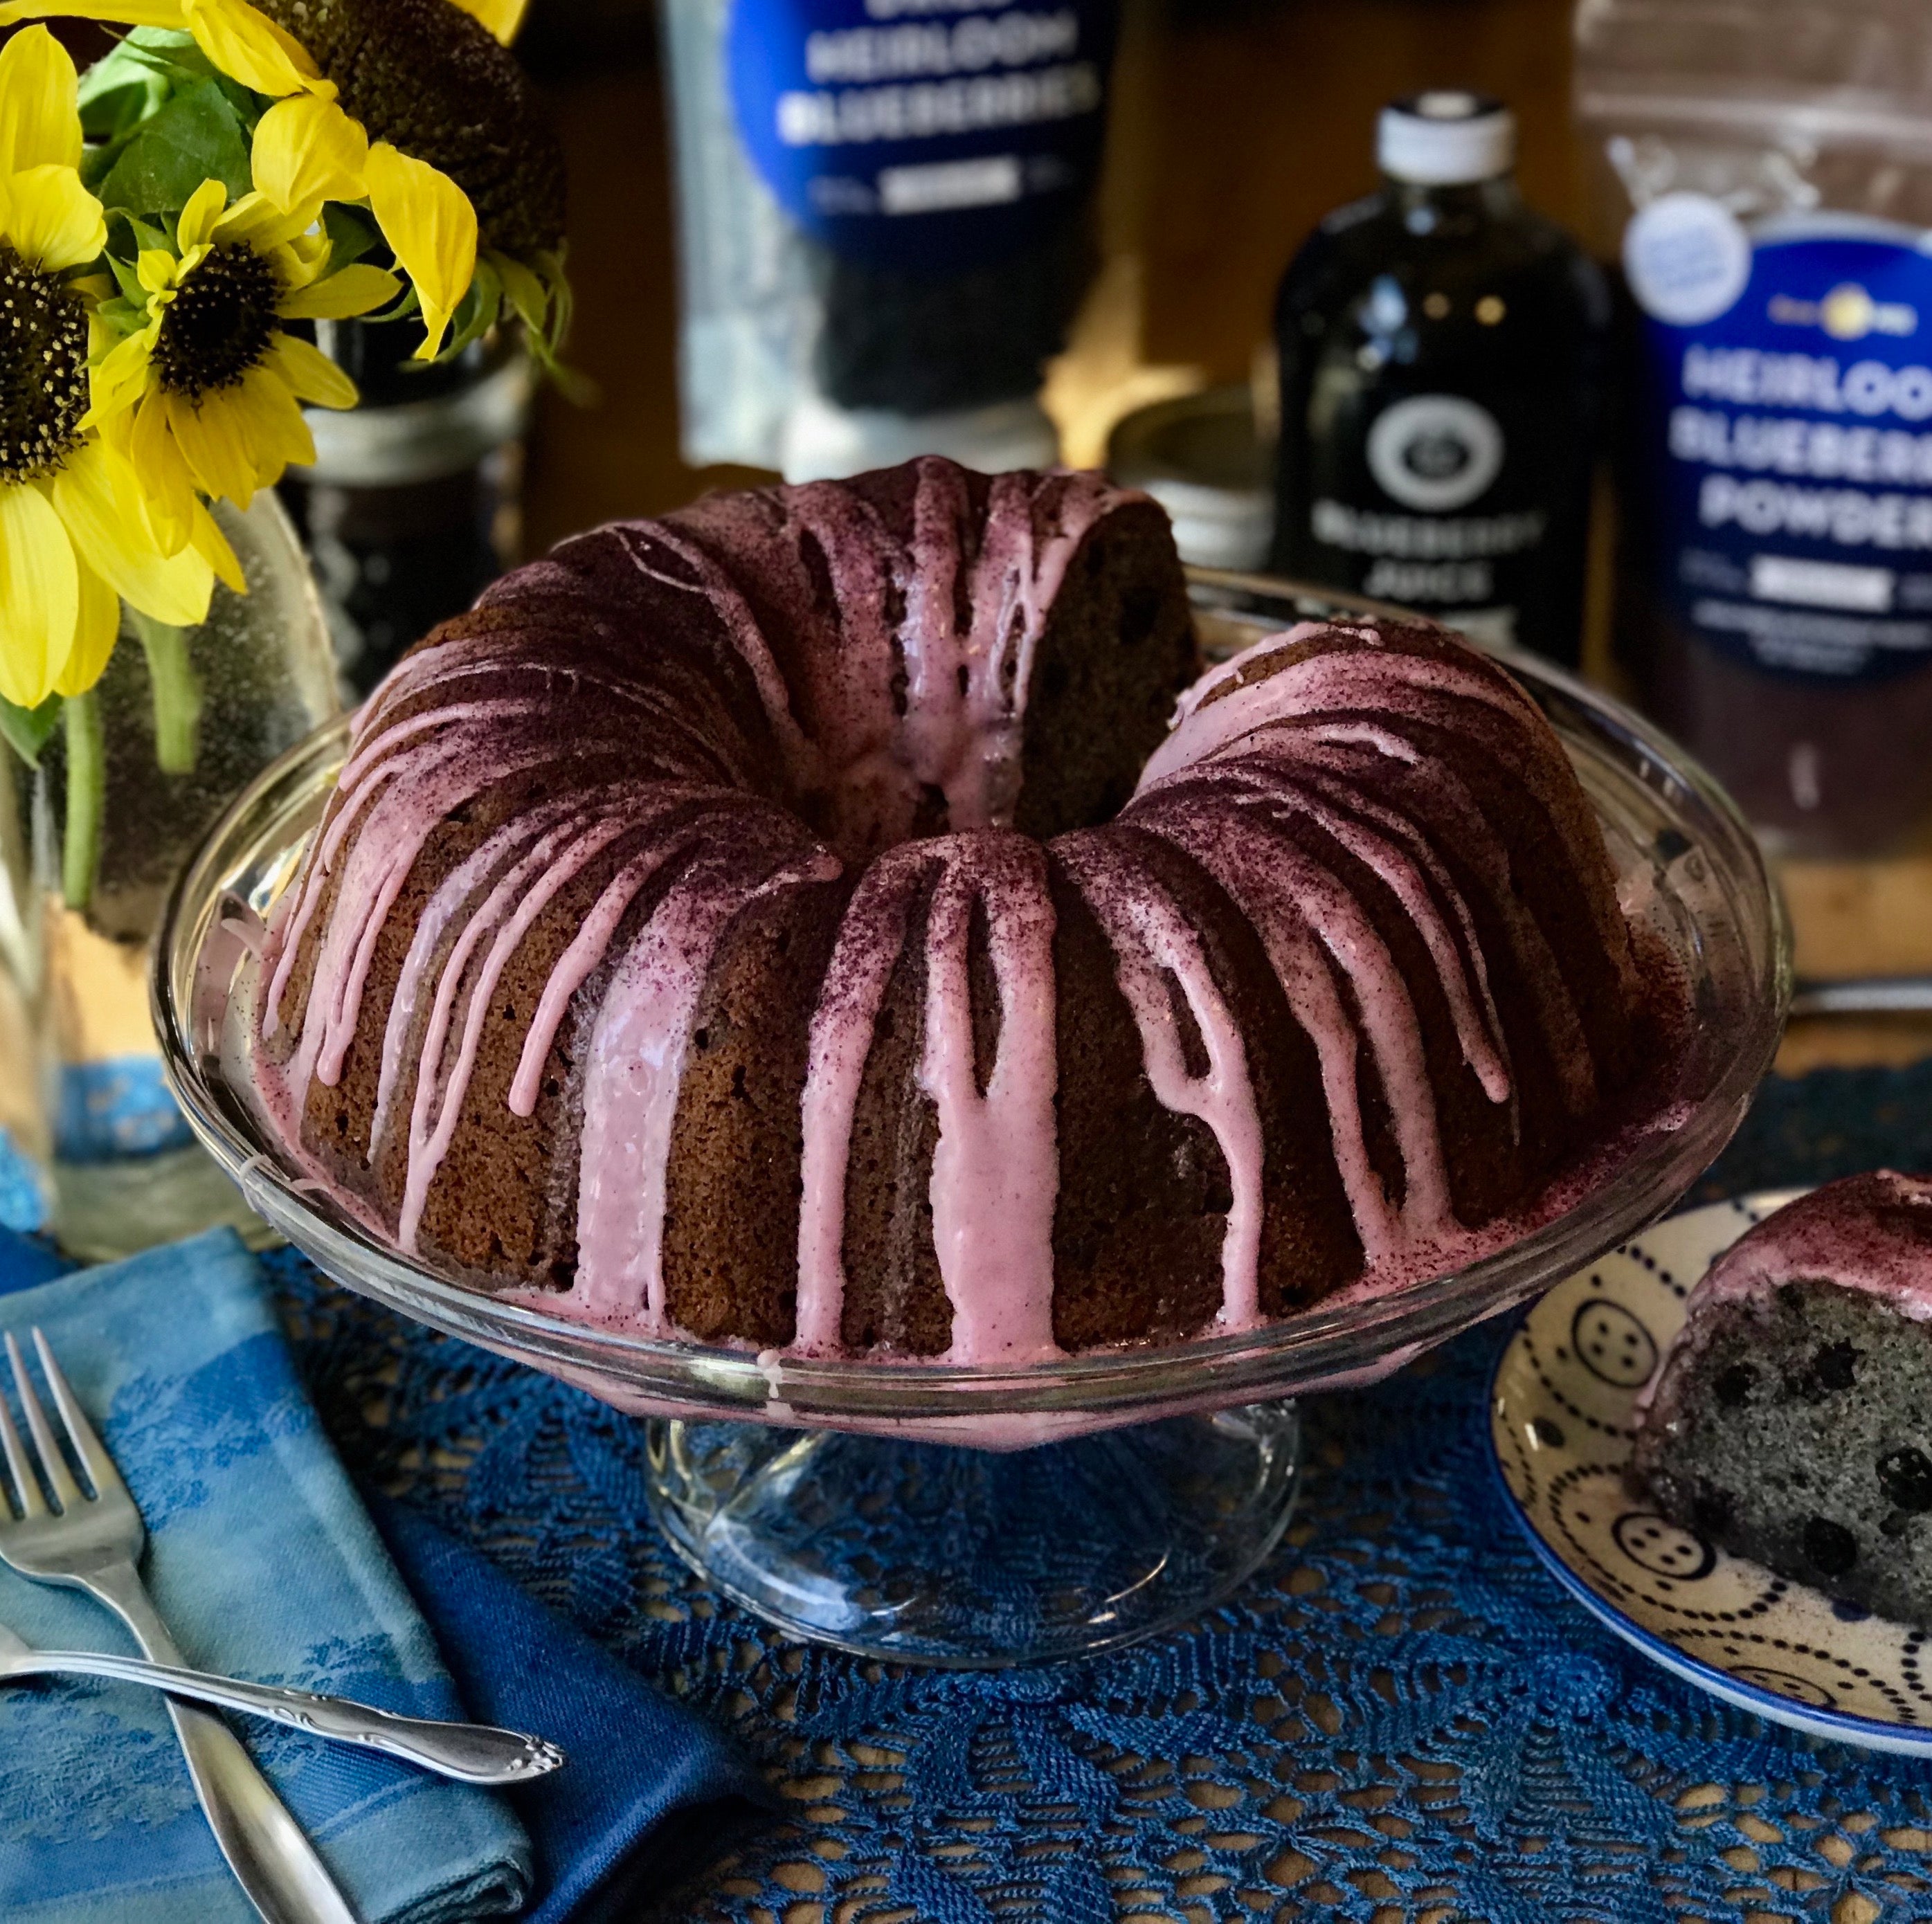 Bundt cake with blueberry icing, blueberry products and sunflowers in background